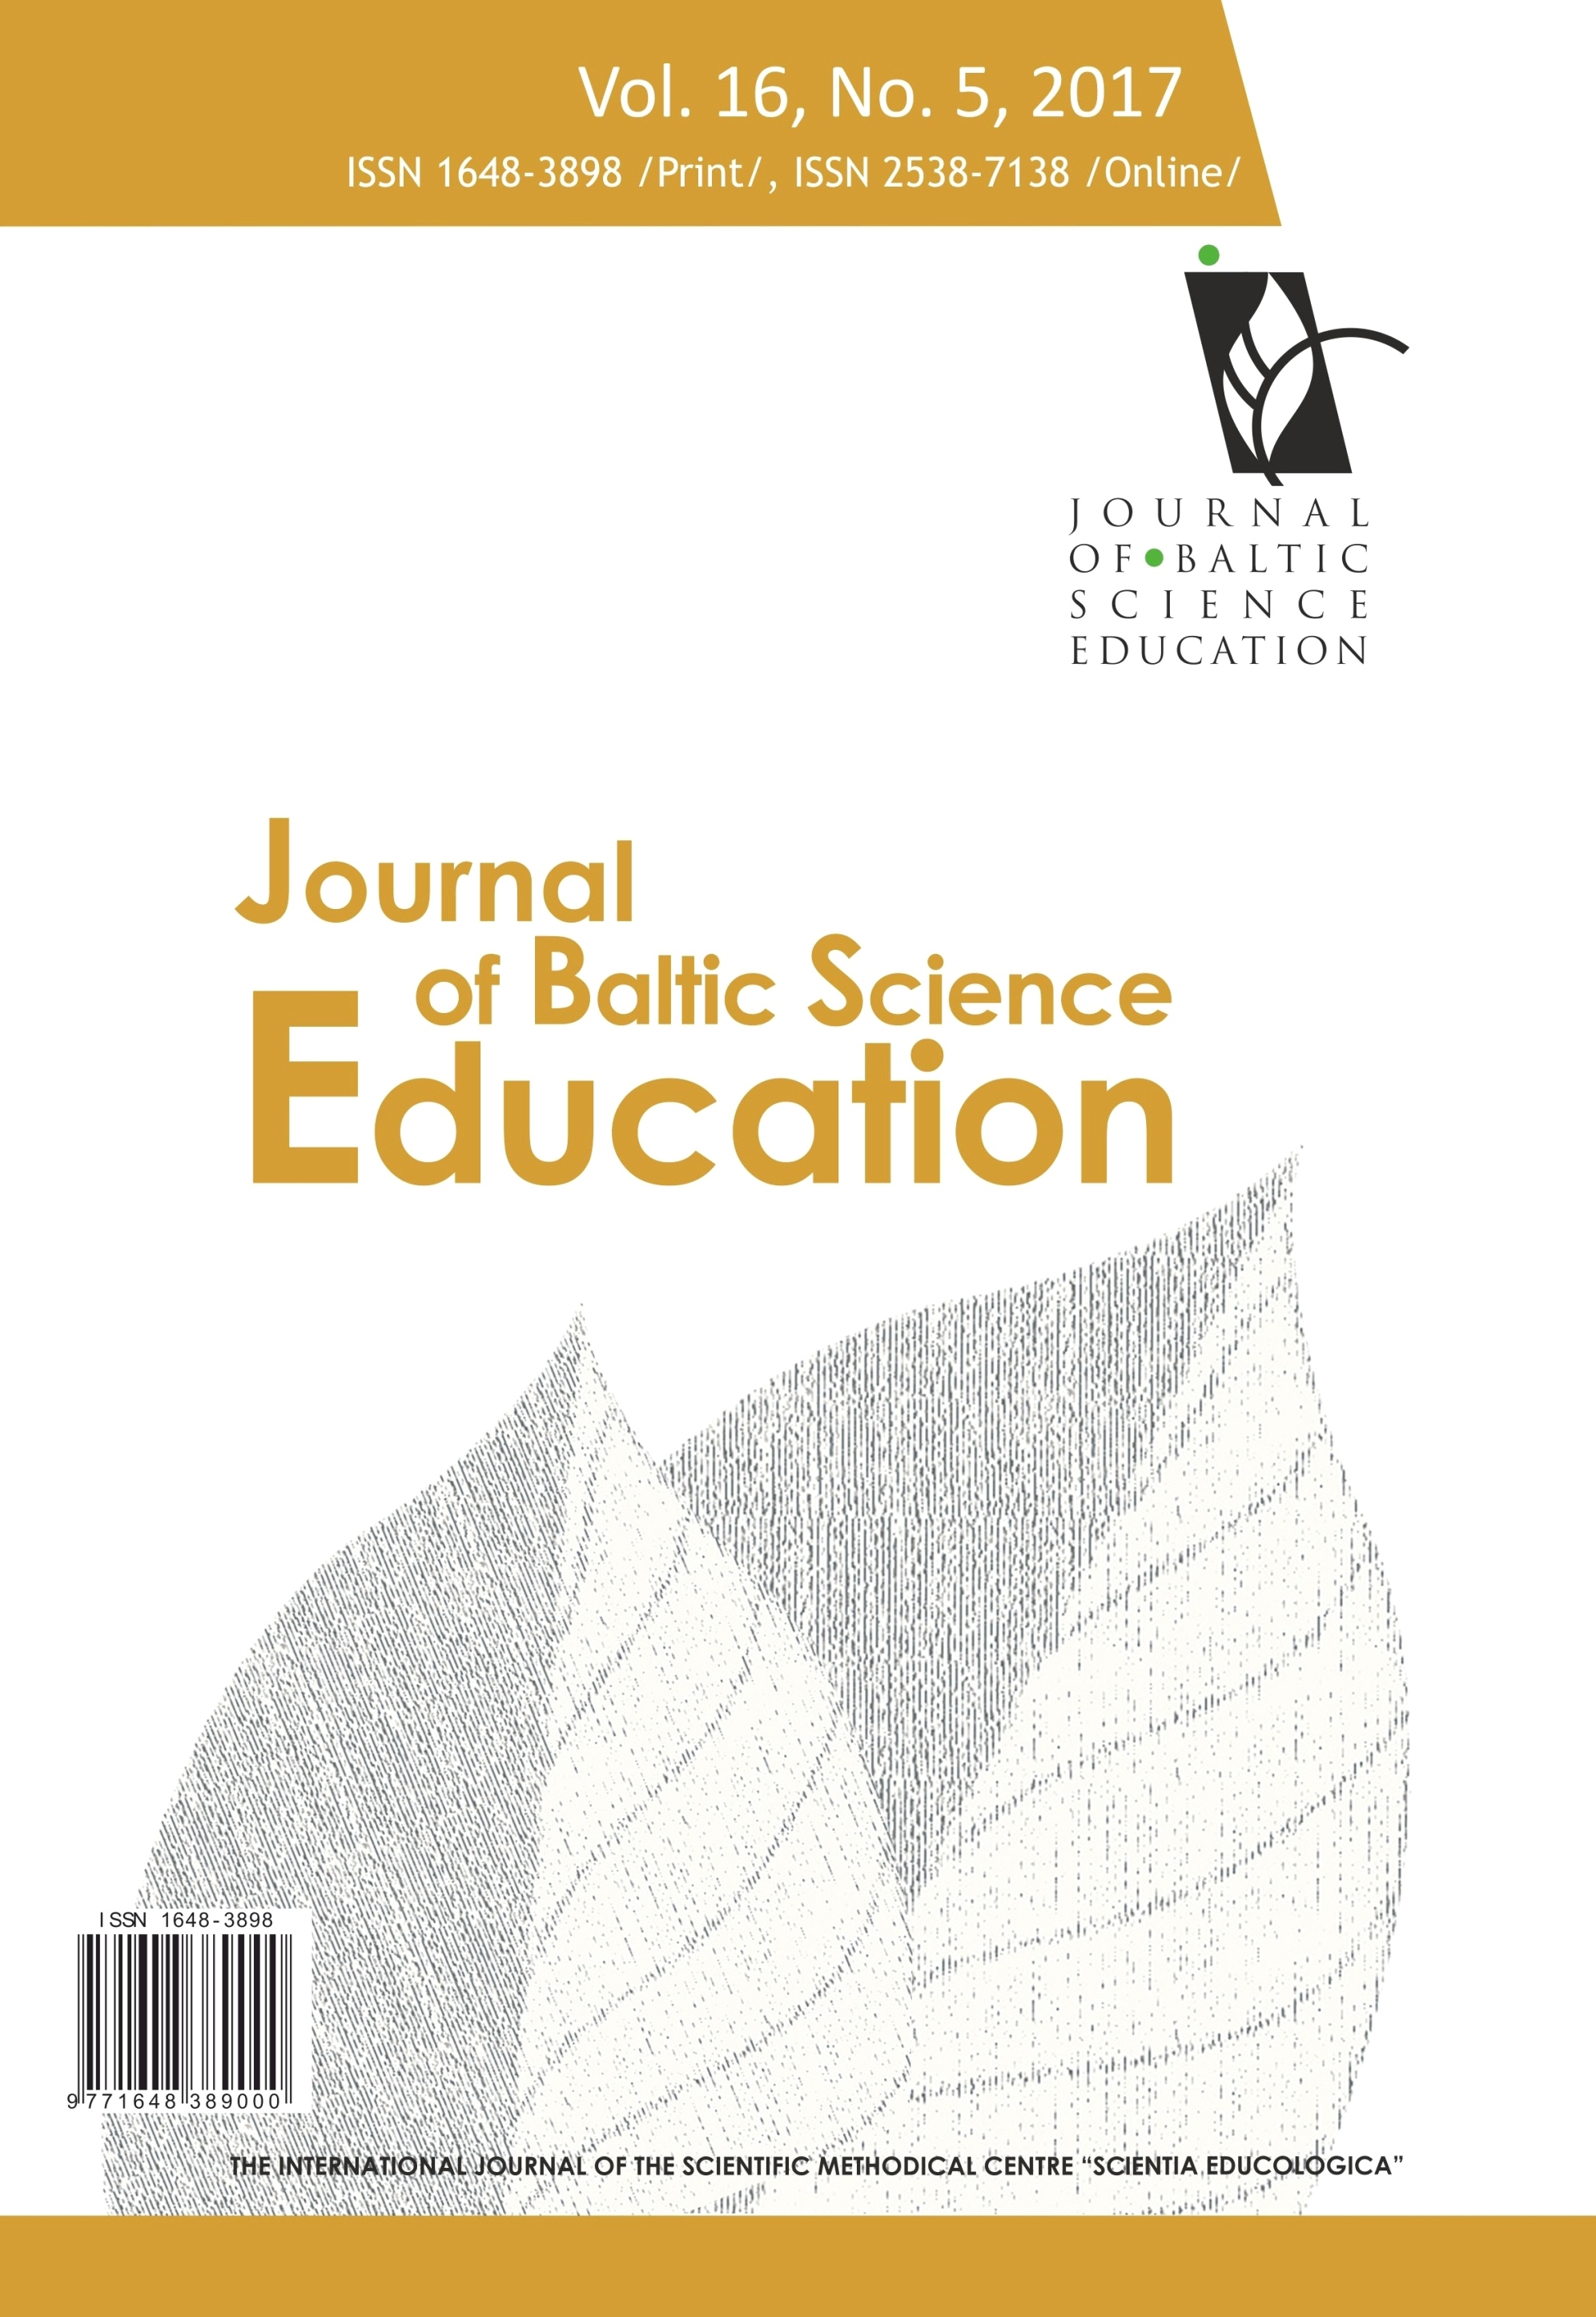 THE VALIDITY AND EFFECTIVENESS OF PHYSICS INDEPENDENT LEARNING MODEL TO IMPROVE PHYSICS PROBLEM SOLVING AND SELF-DIRECTED LEARNING SKILLS OF STUDENTS IN OPEN AND DISTANCE EDUCATION SYSTEMS Cover Image